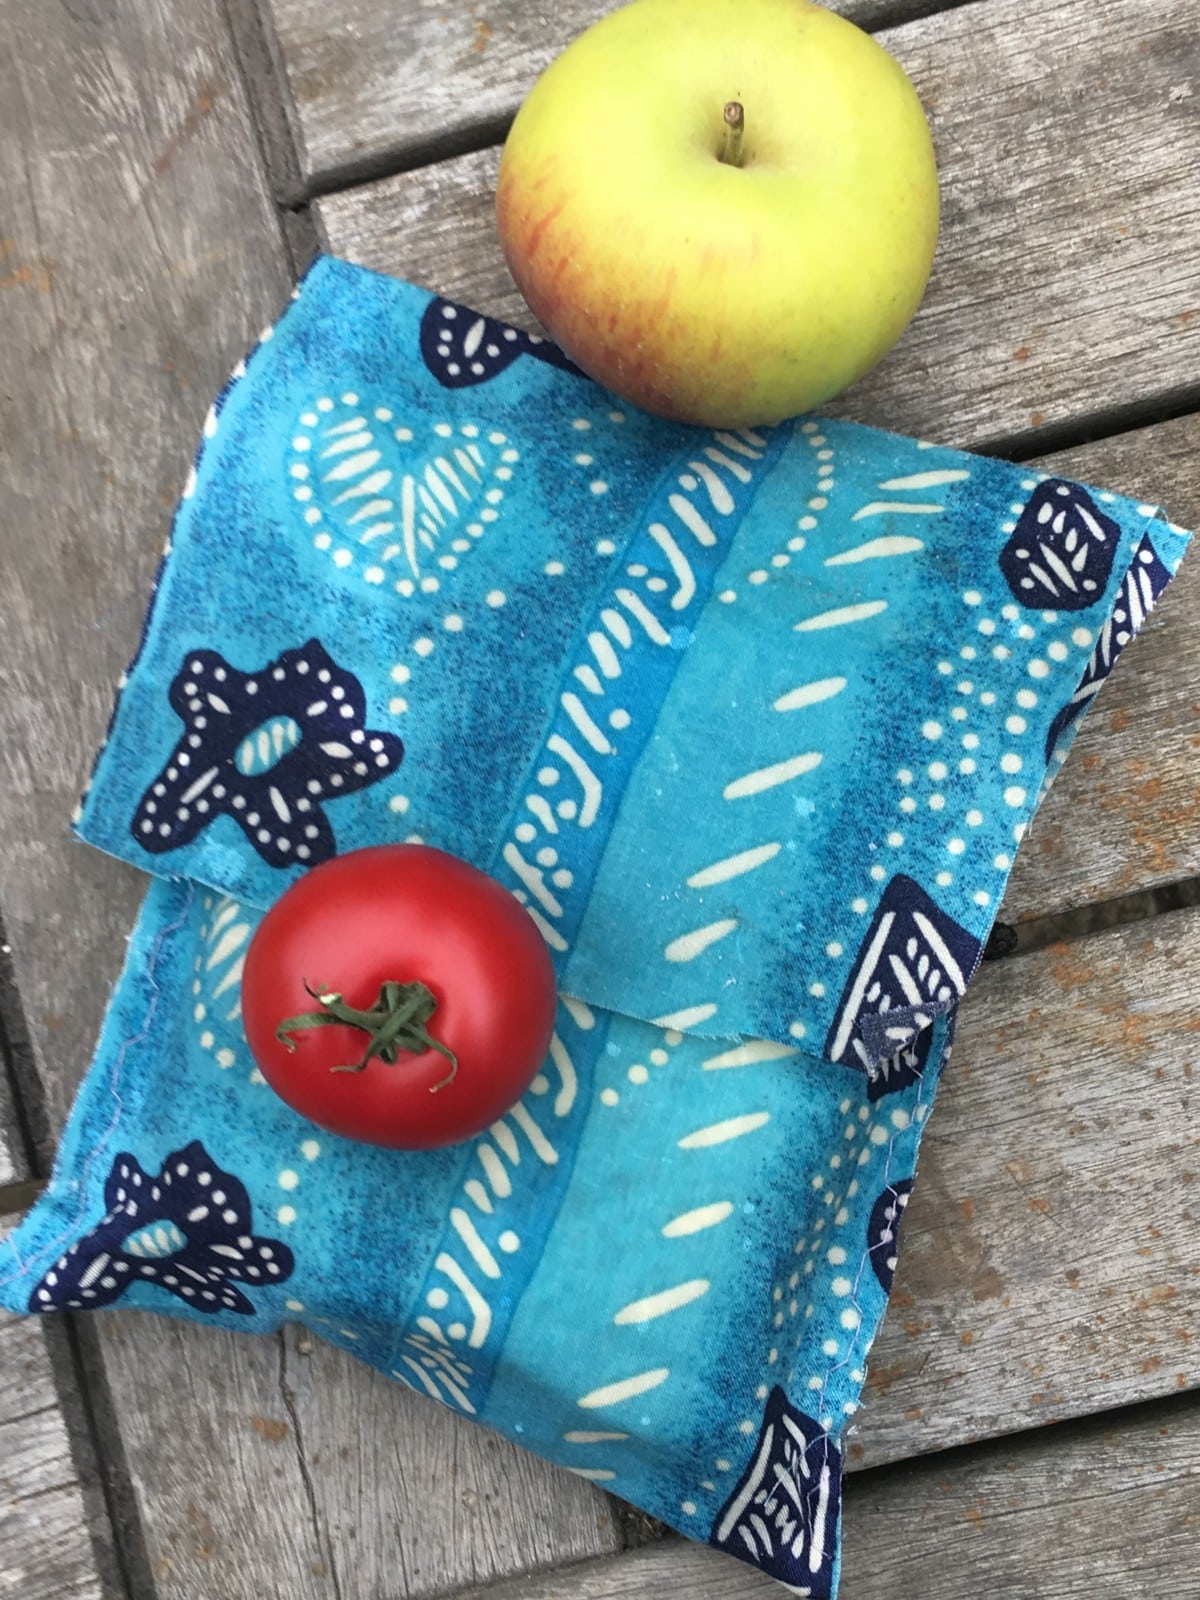 a beeswax sandwich bag, containing a sandwich. An apple and tomato are nearby.